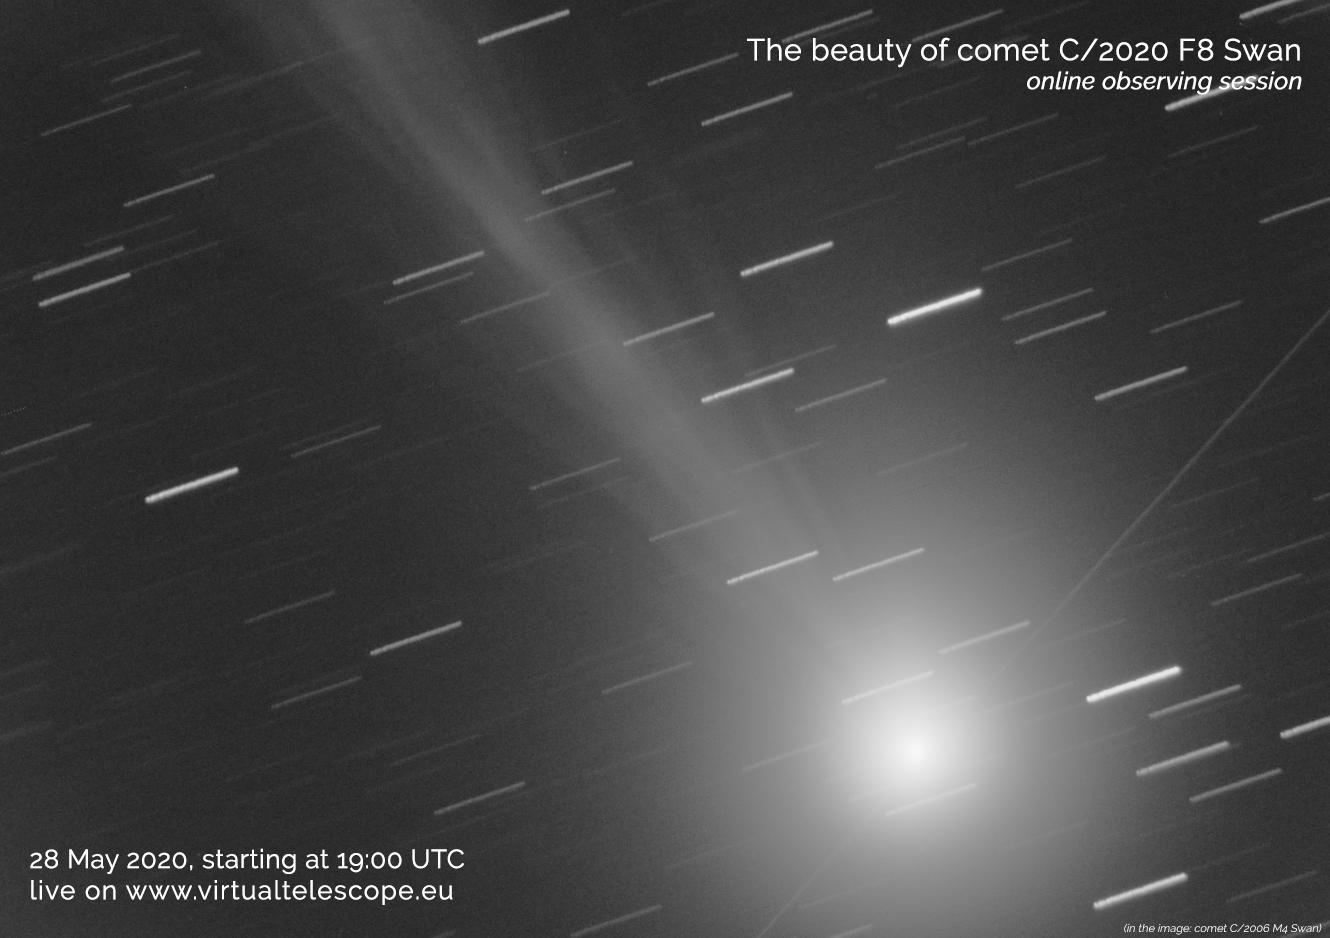 "The Beauty of Comet C/2020 F8 Swan": poster of the event.